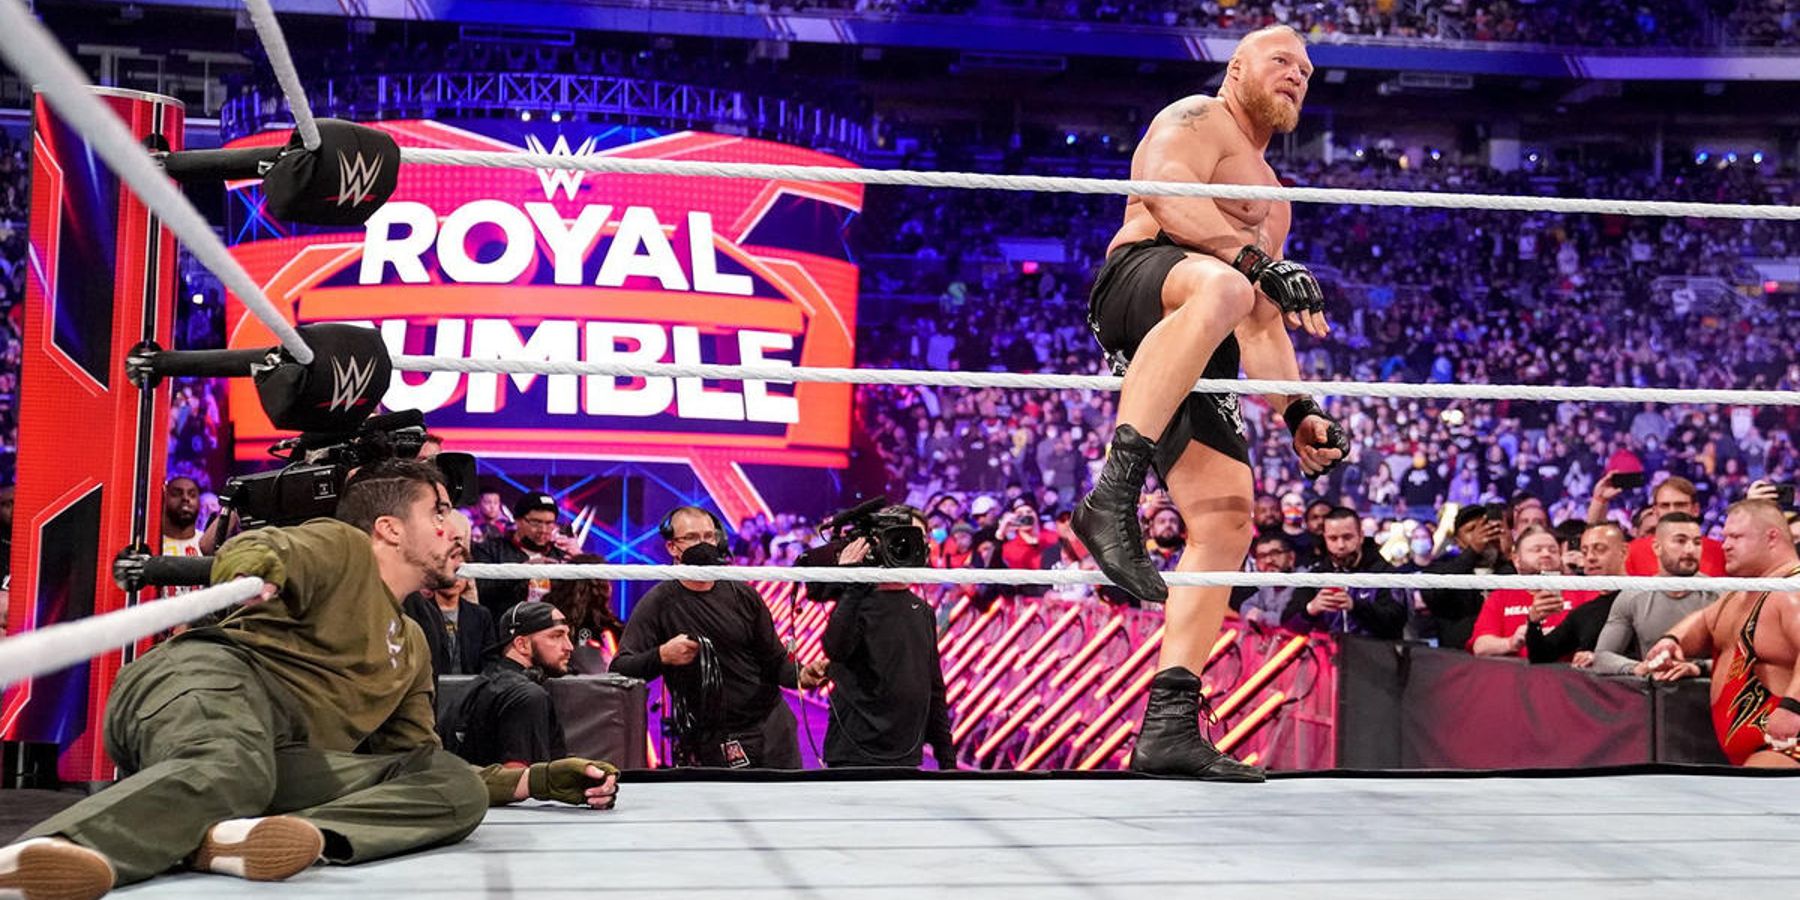 Brock Lesnar makes his surprise appearance at WWE's Royal Rumble show in 2022.